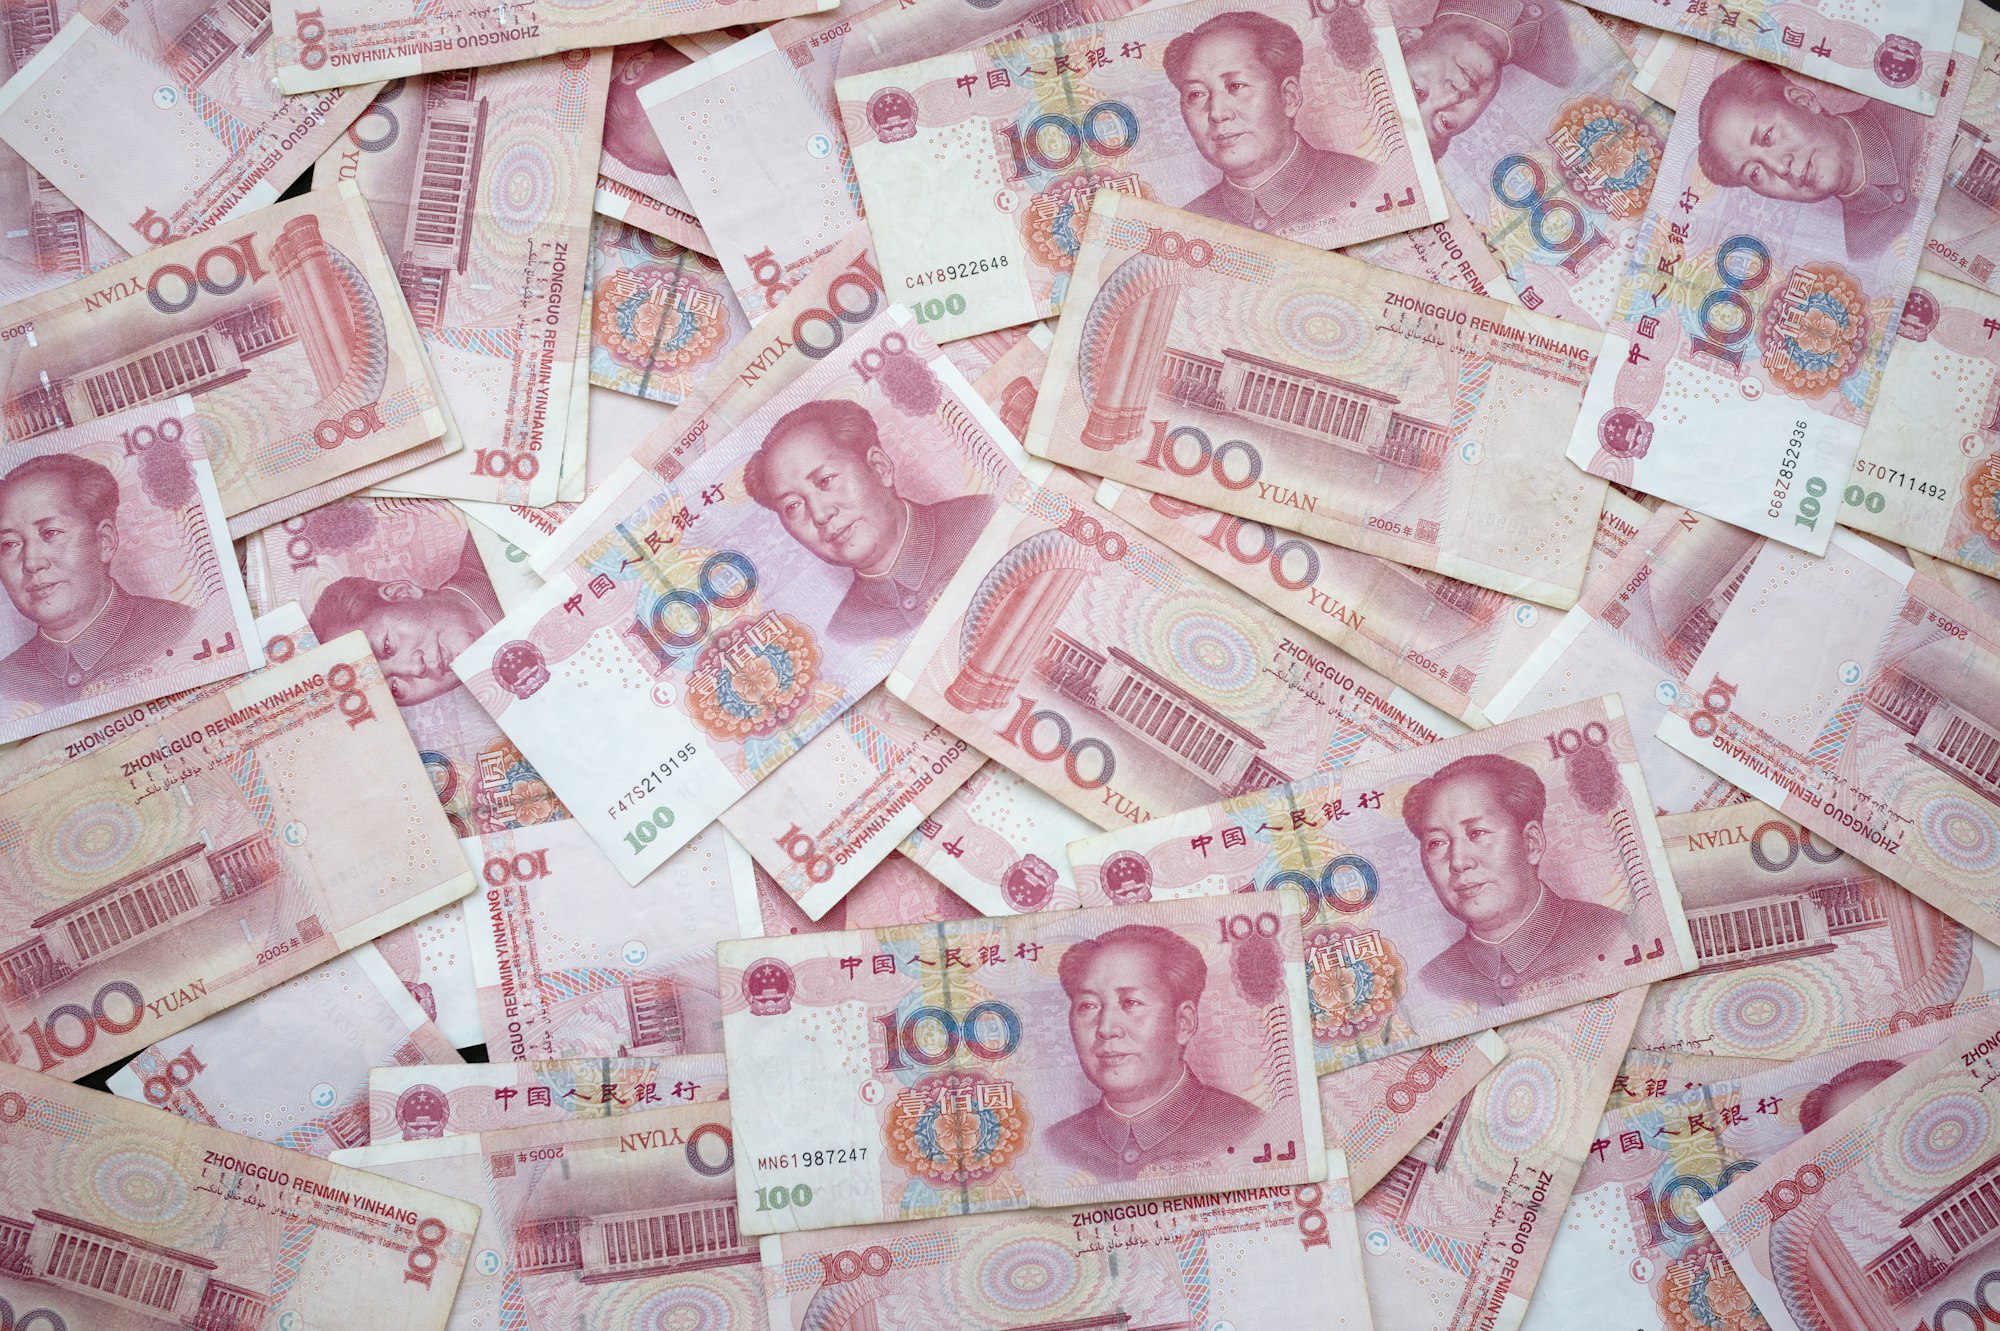 National Welfare Fund will be actively replenished with yuan, rupees and lira, according to the Central Bank report